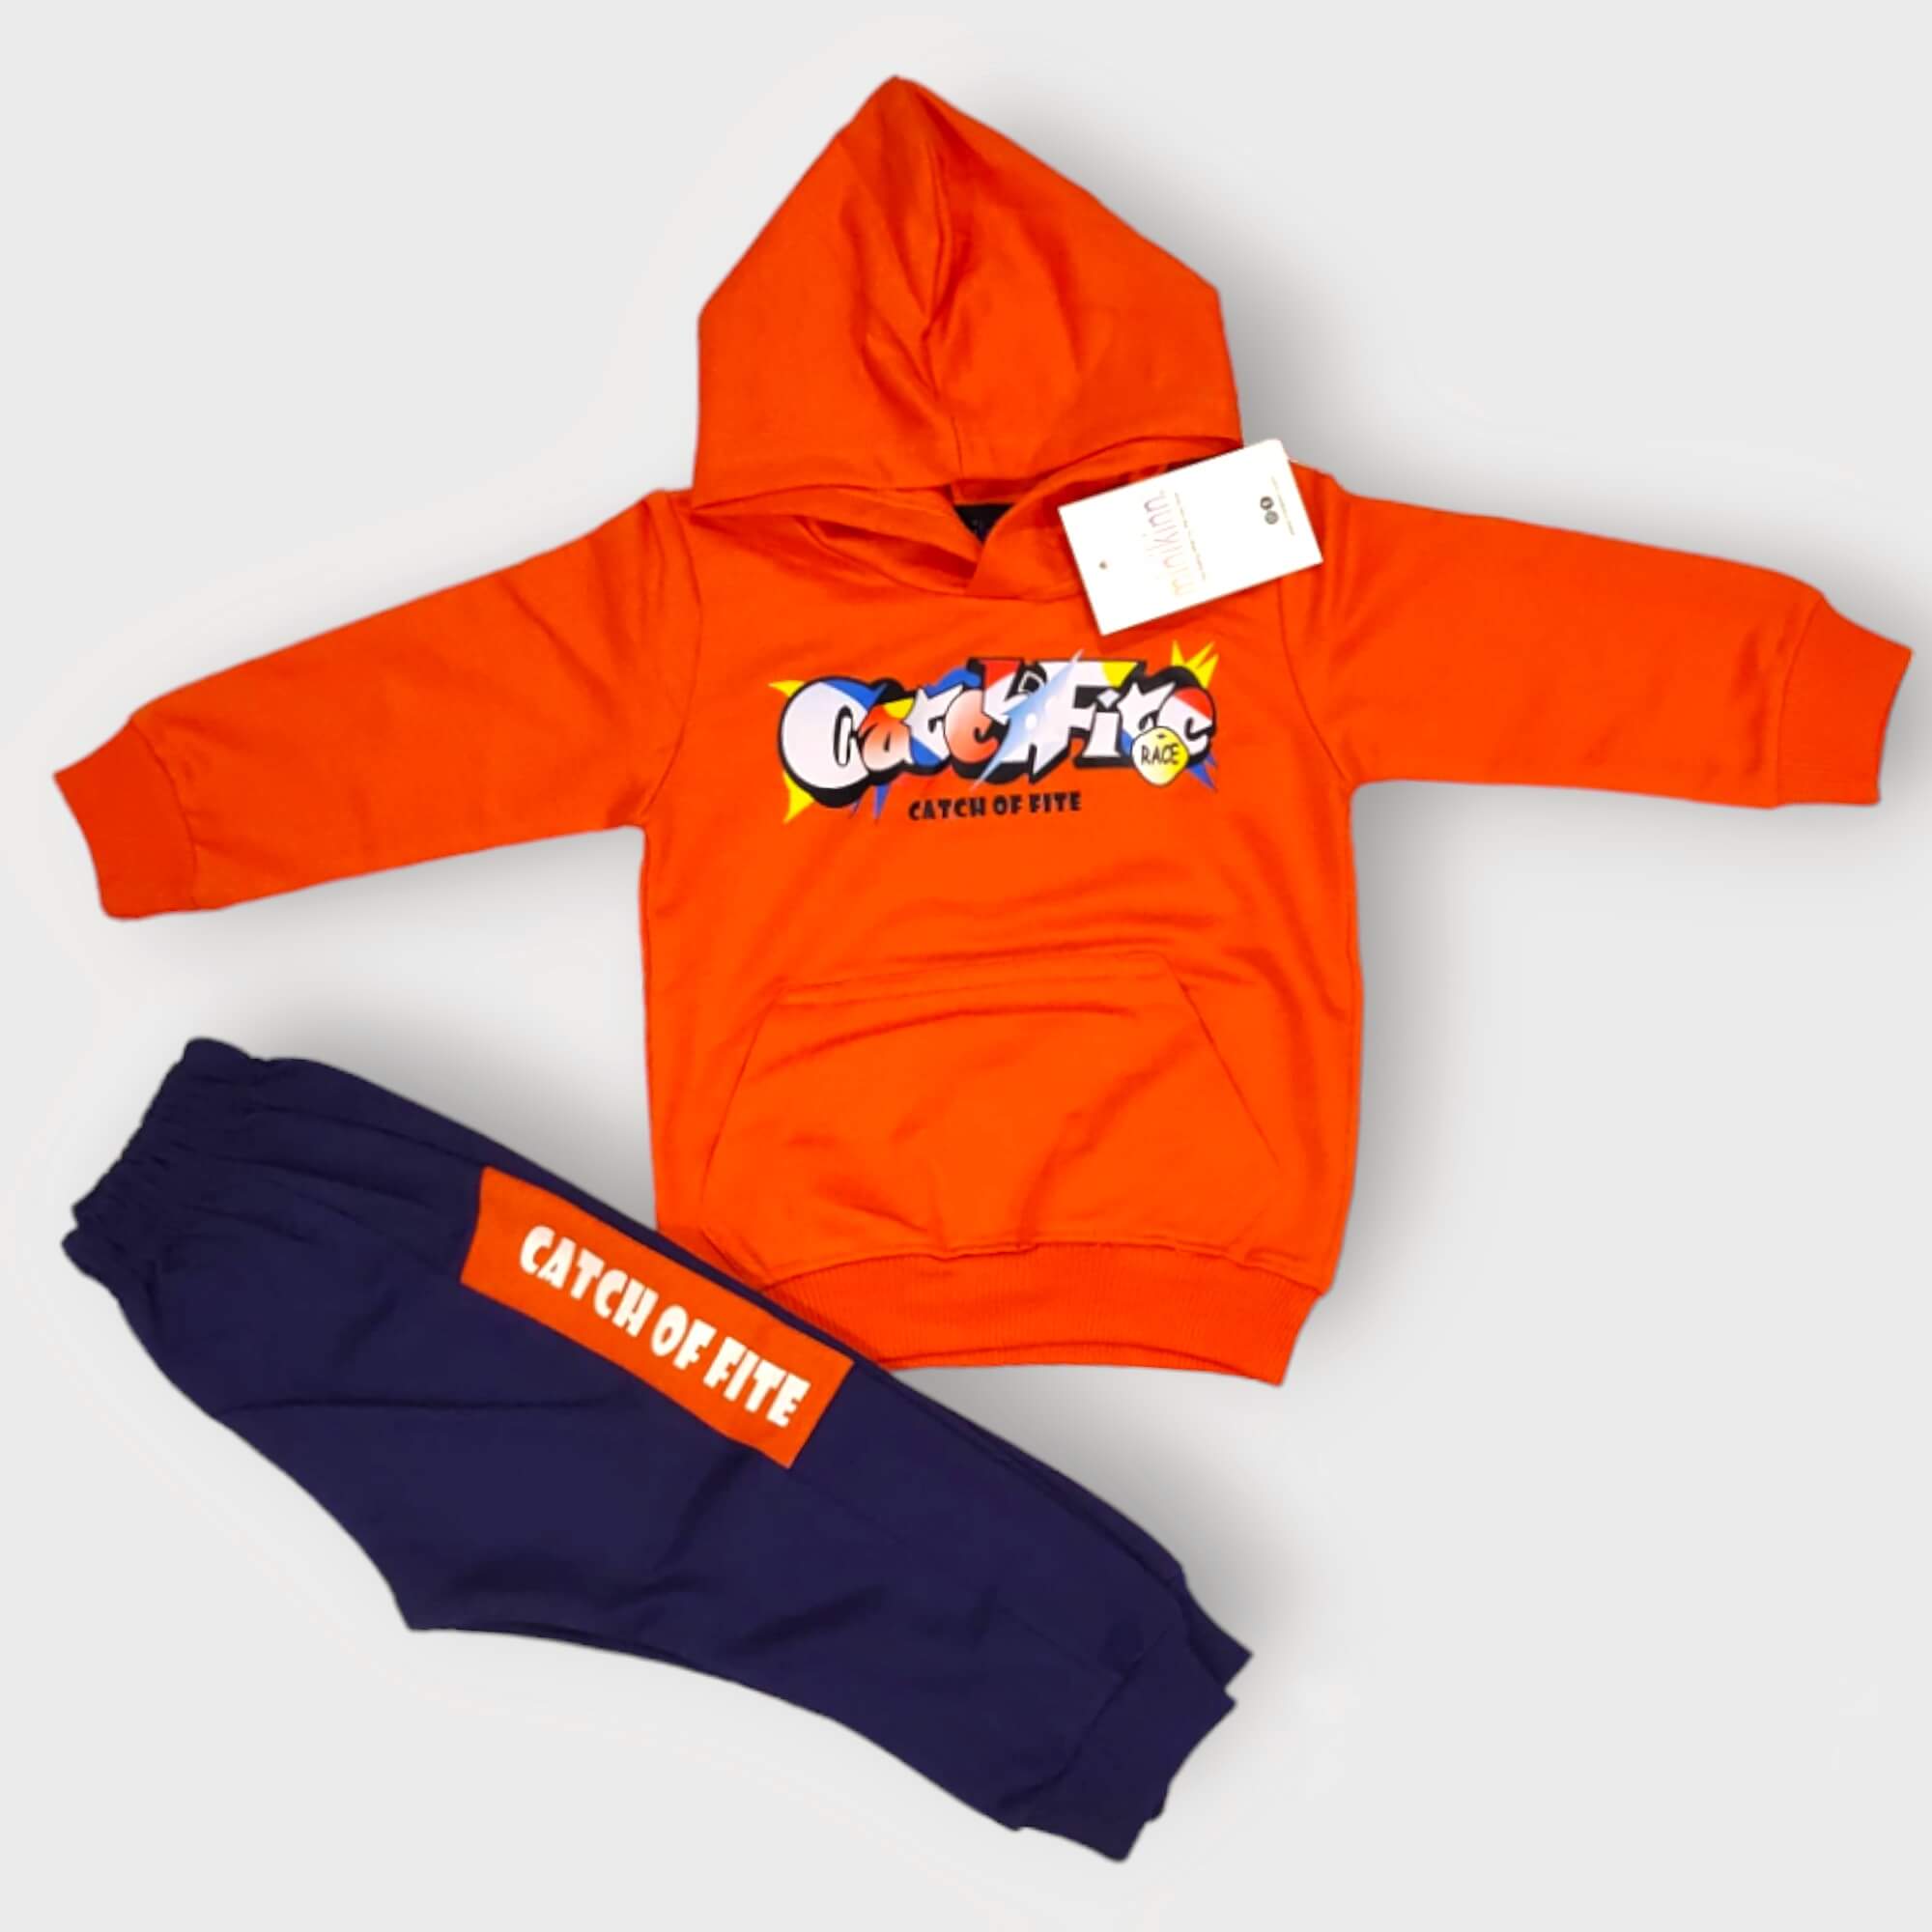 Catch of Fire Printed Orange Boys Hoodie and bottom